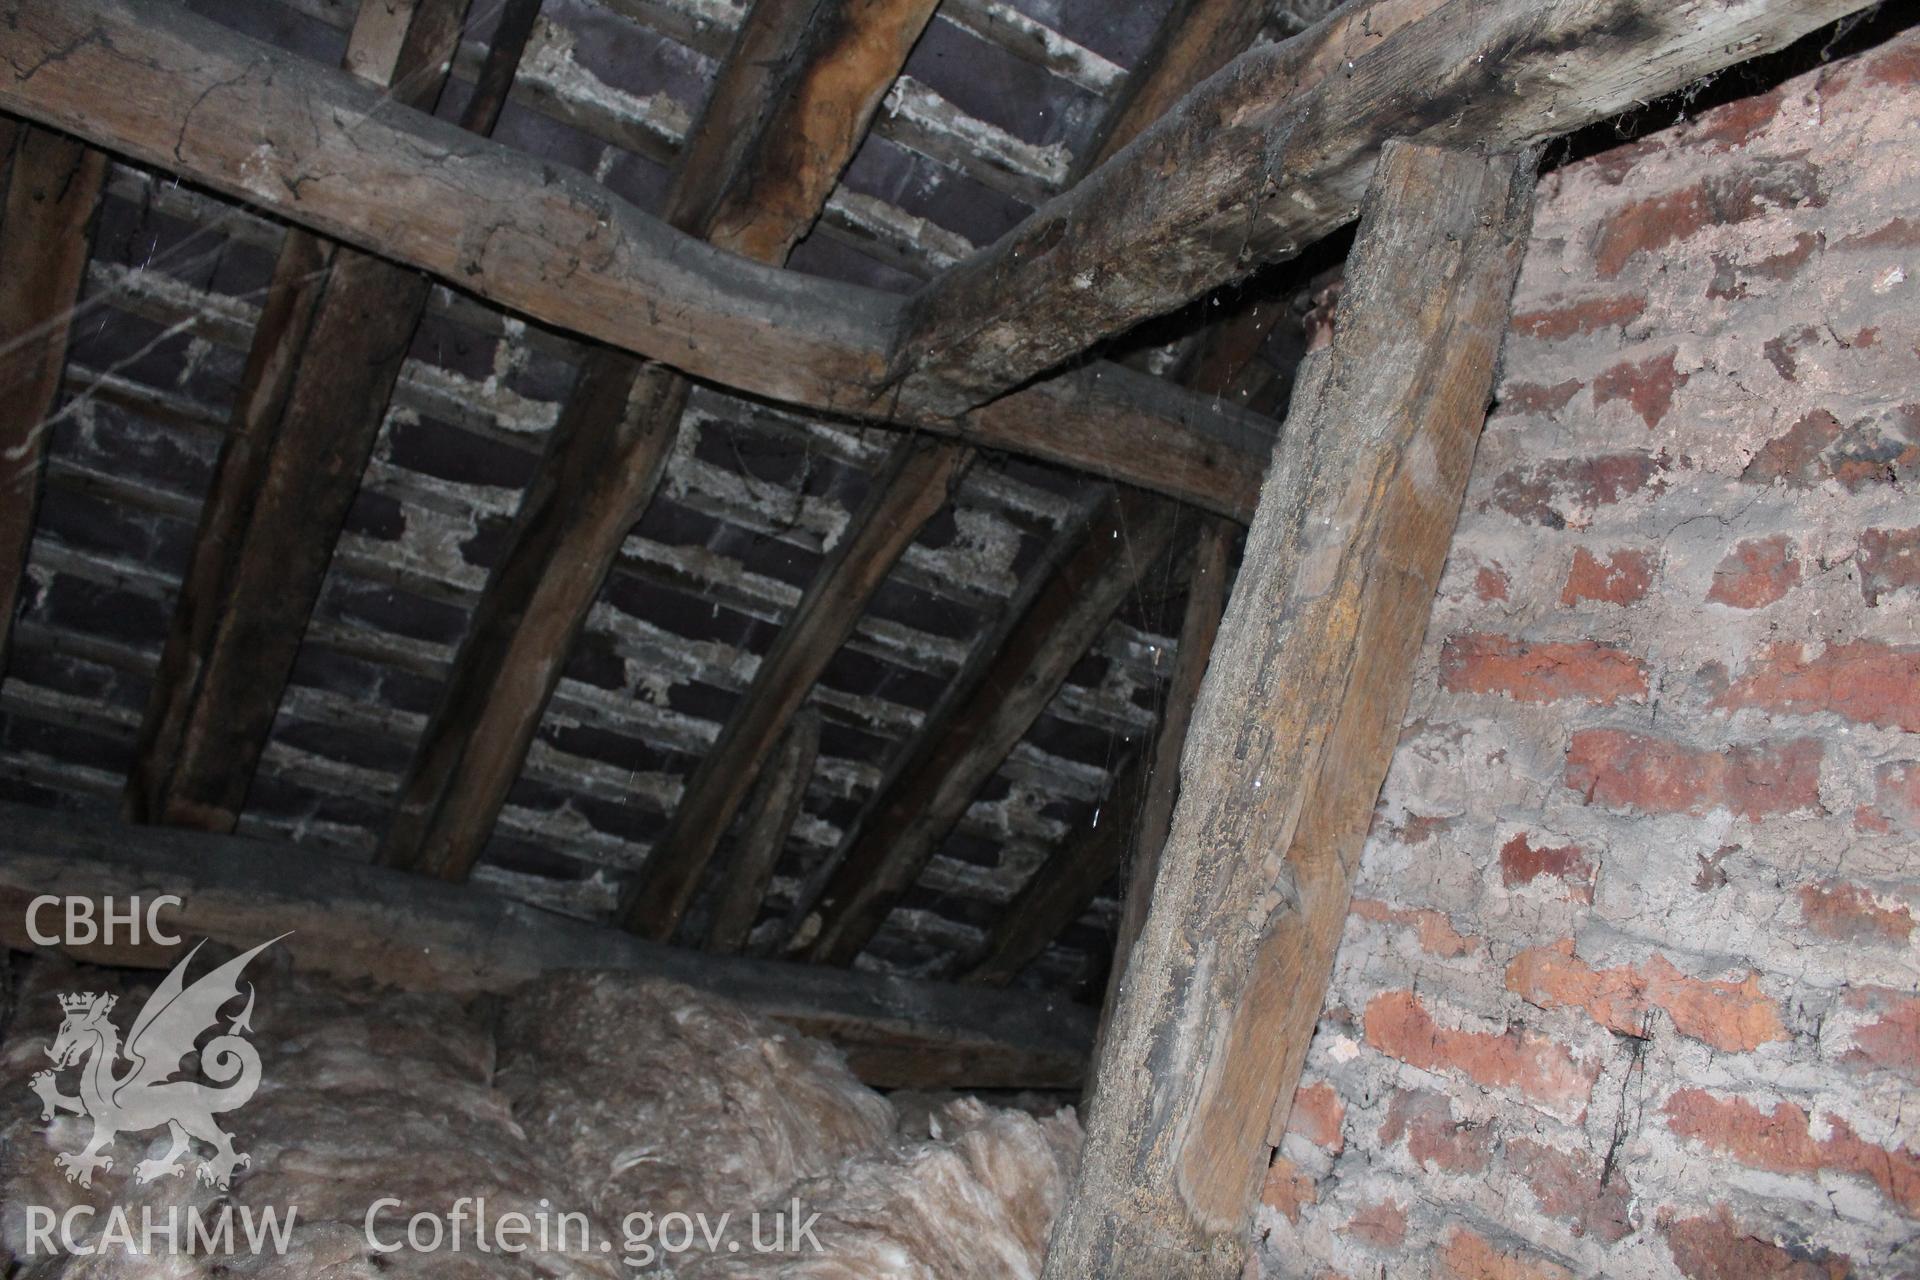 Colour photograph showing detail of red brick wall, insulating wool and timber roof frame at 5-7 Mwrog Street, Ruthin. Photographed during survey conducted by Geoff Ward on 14th May 2014.